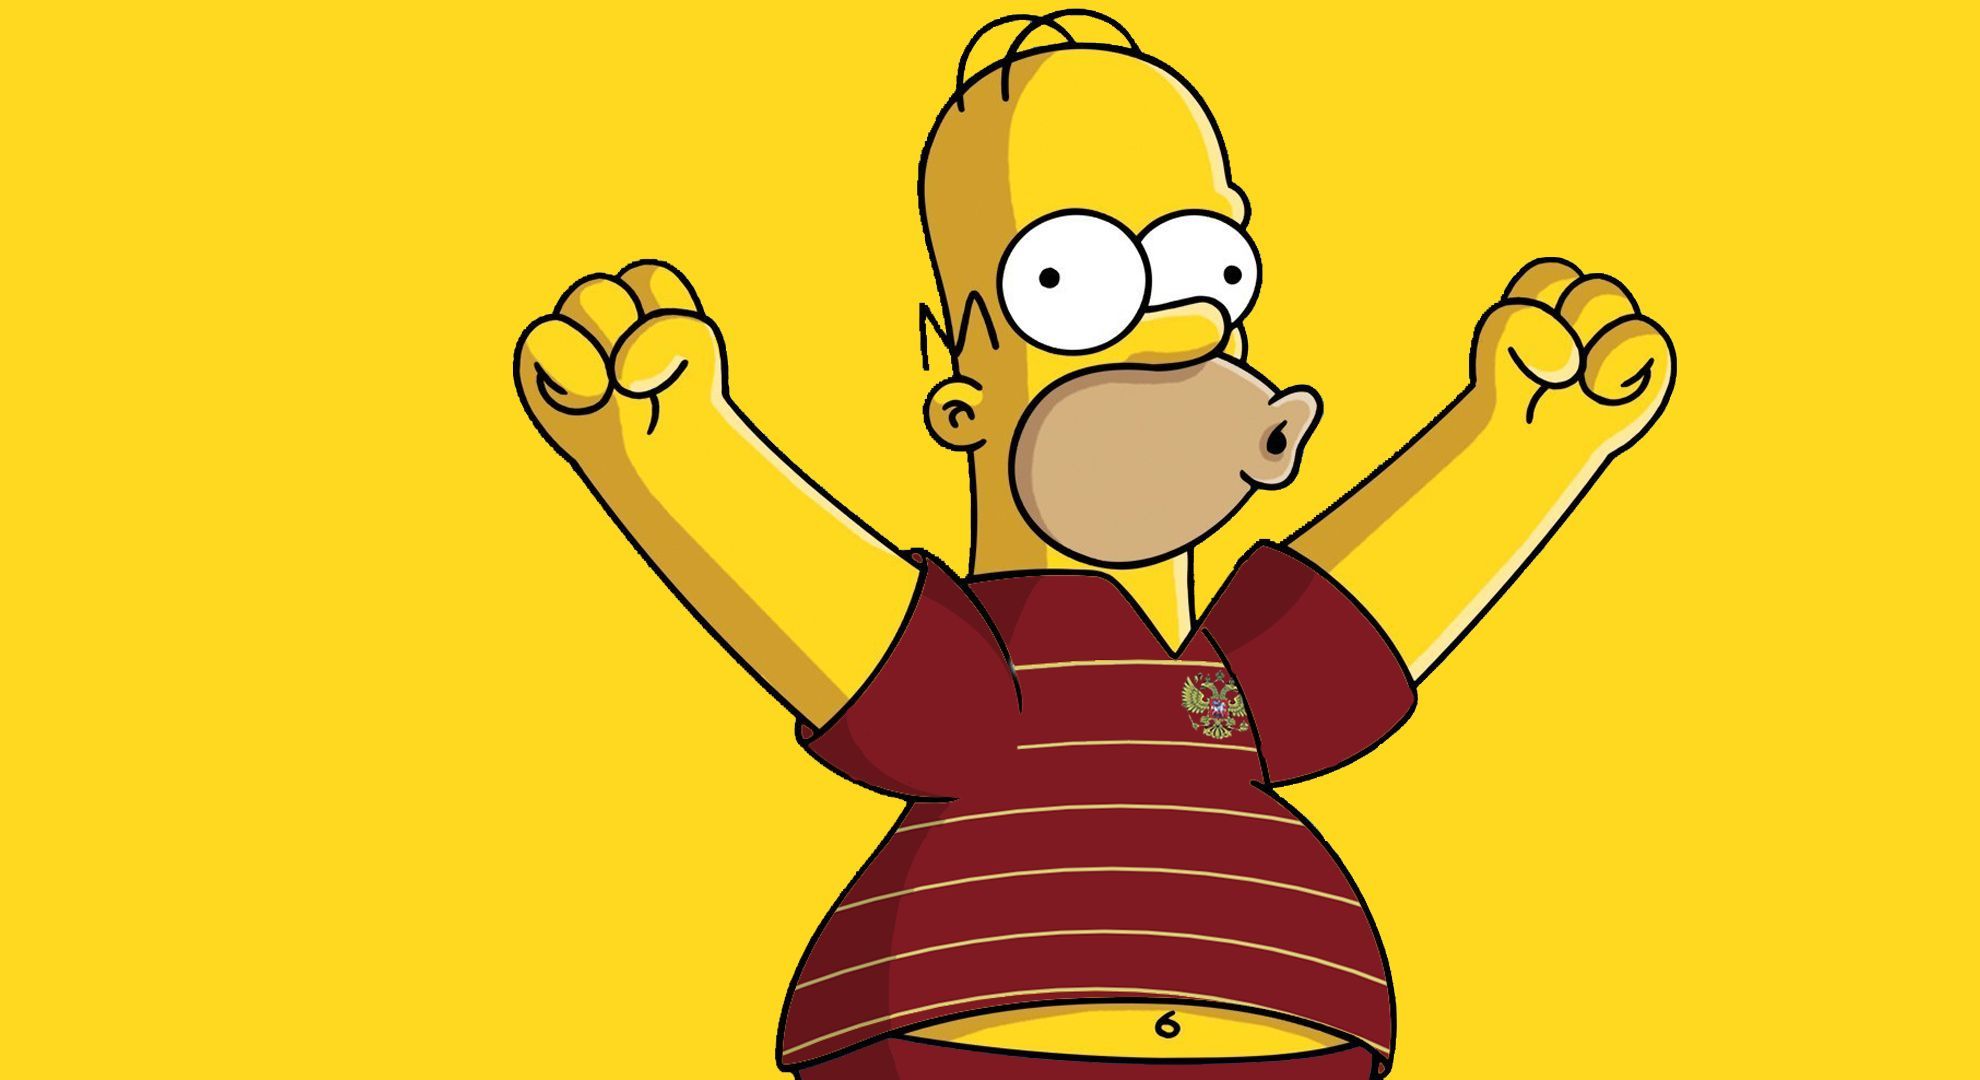 The simpsons character is shown with his arms raised - The Simpsons